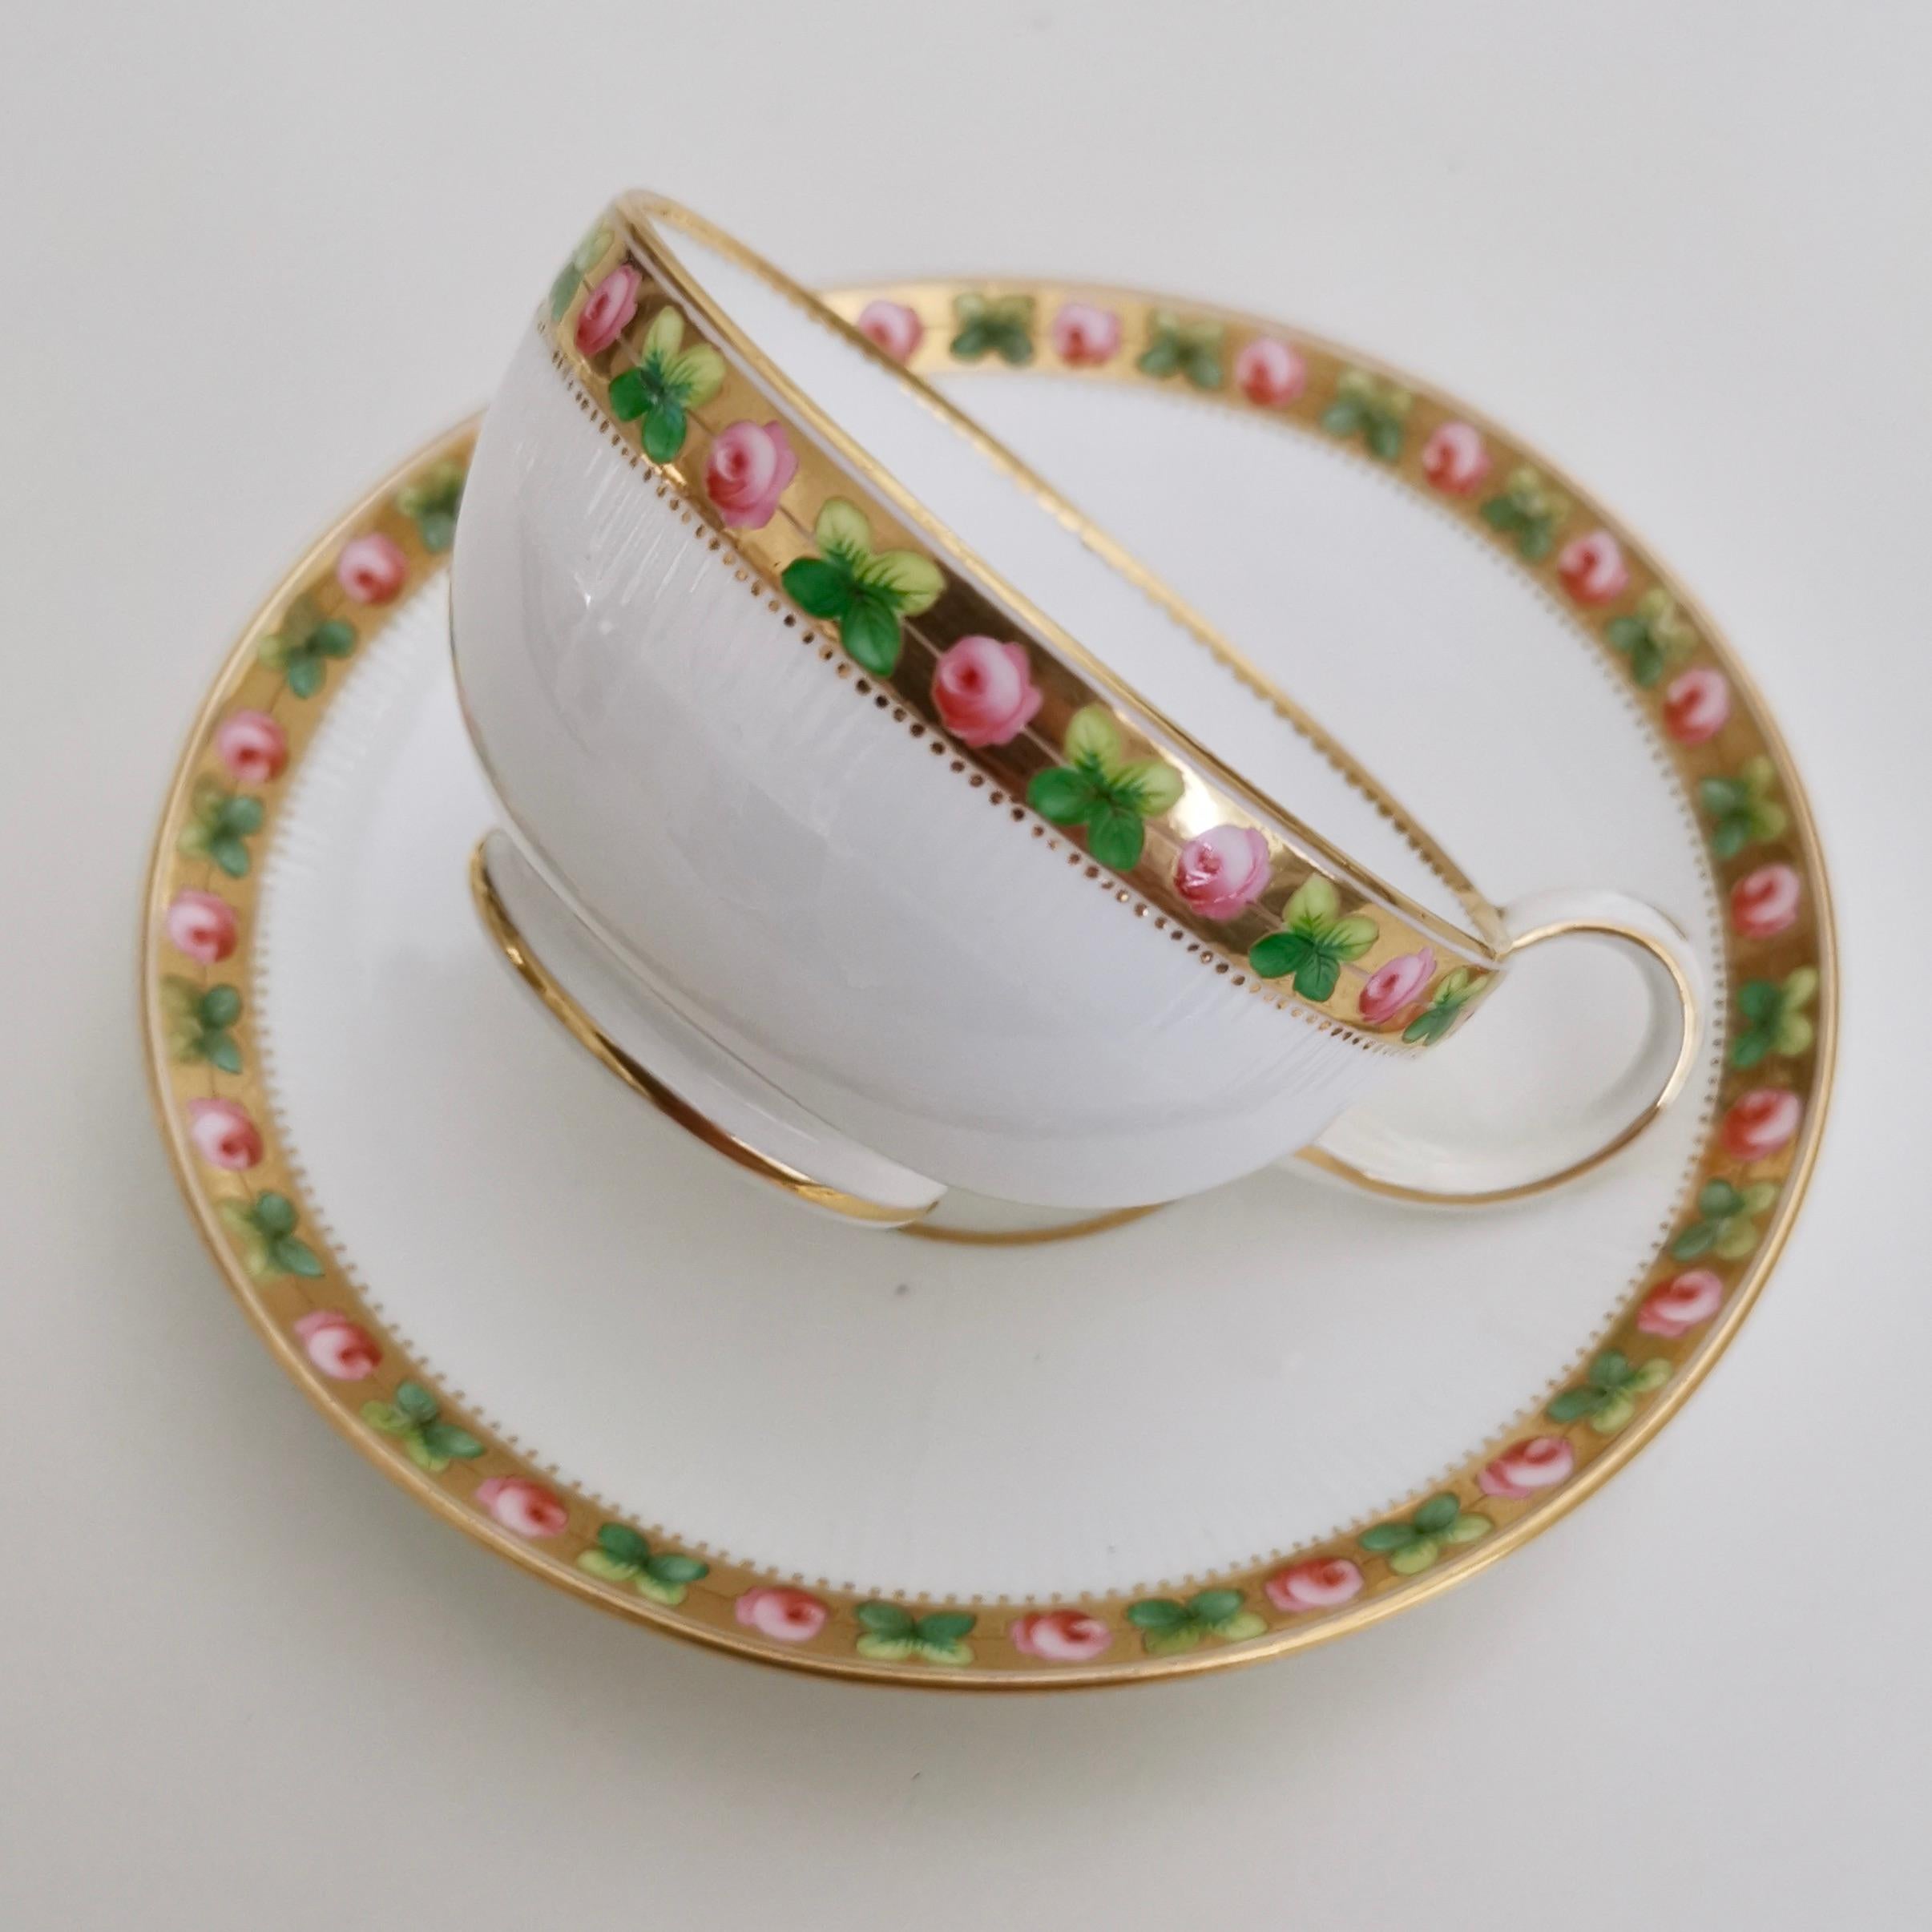 Victorian Minton Porcelain Teacup, White Paris Fluted with Roses and Gilt, 1862